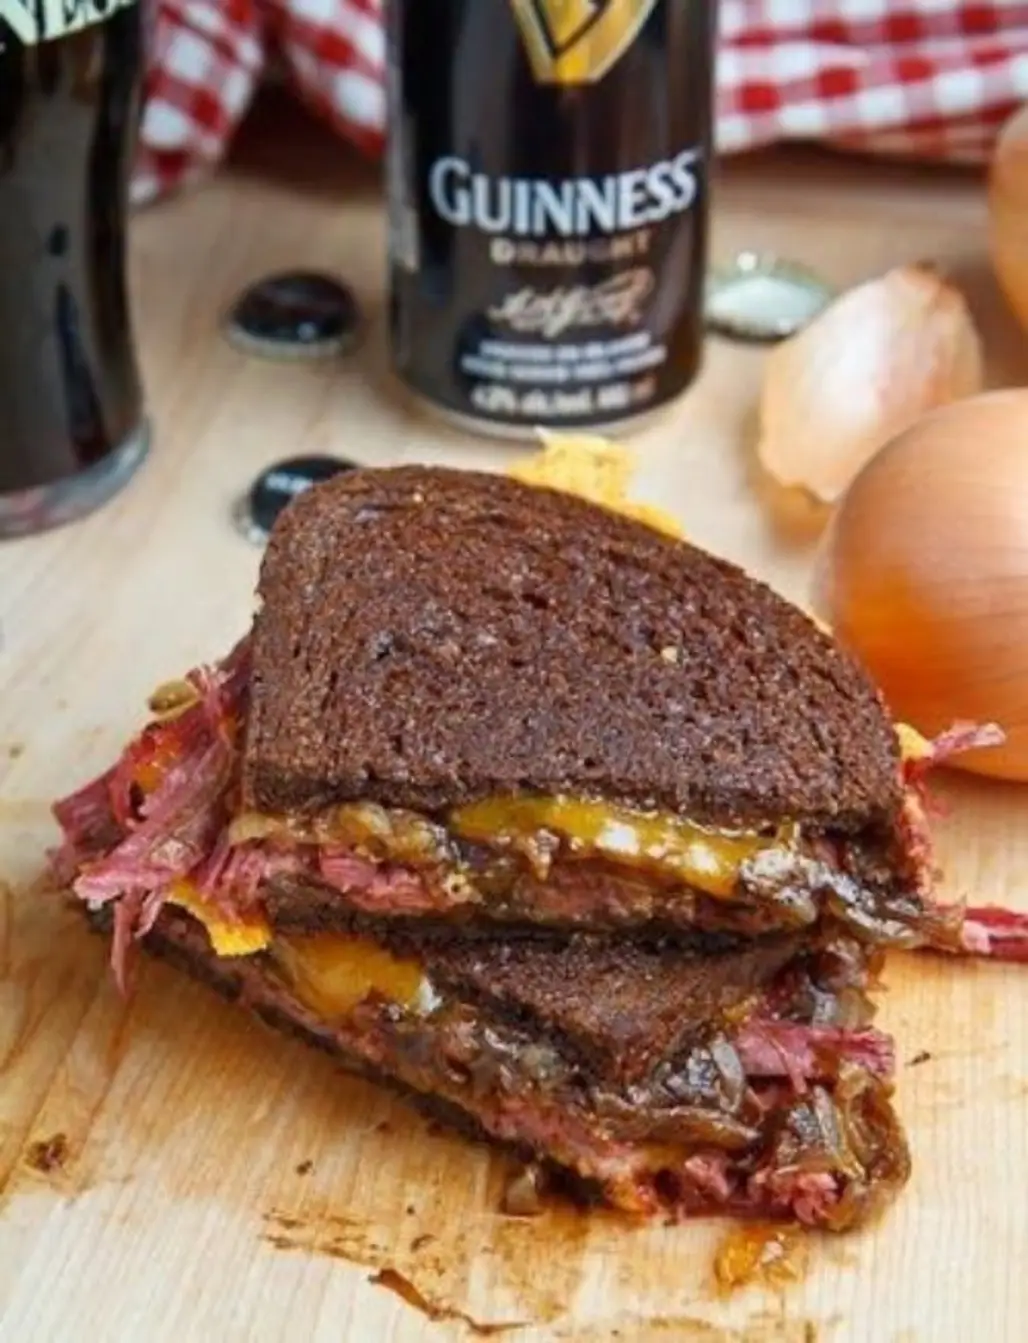 Corned Beef Grilled Cheese Sandwich with Guinness Caramelized Onions